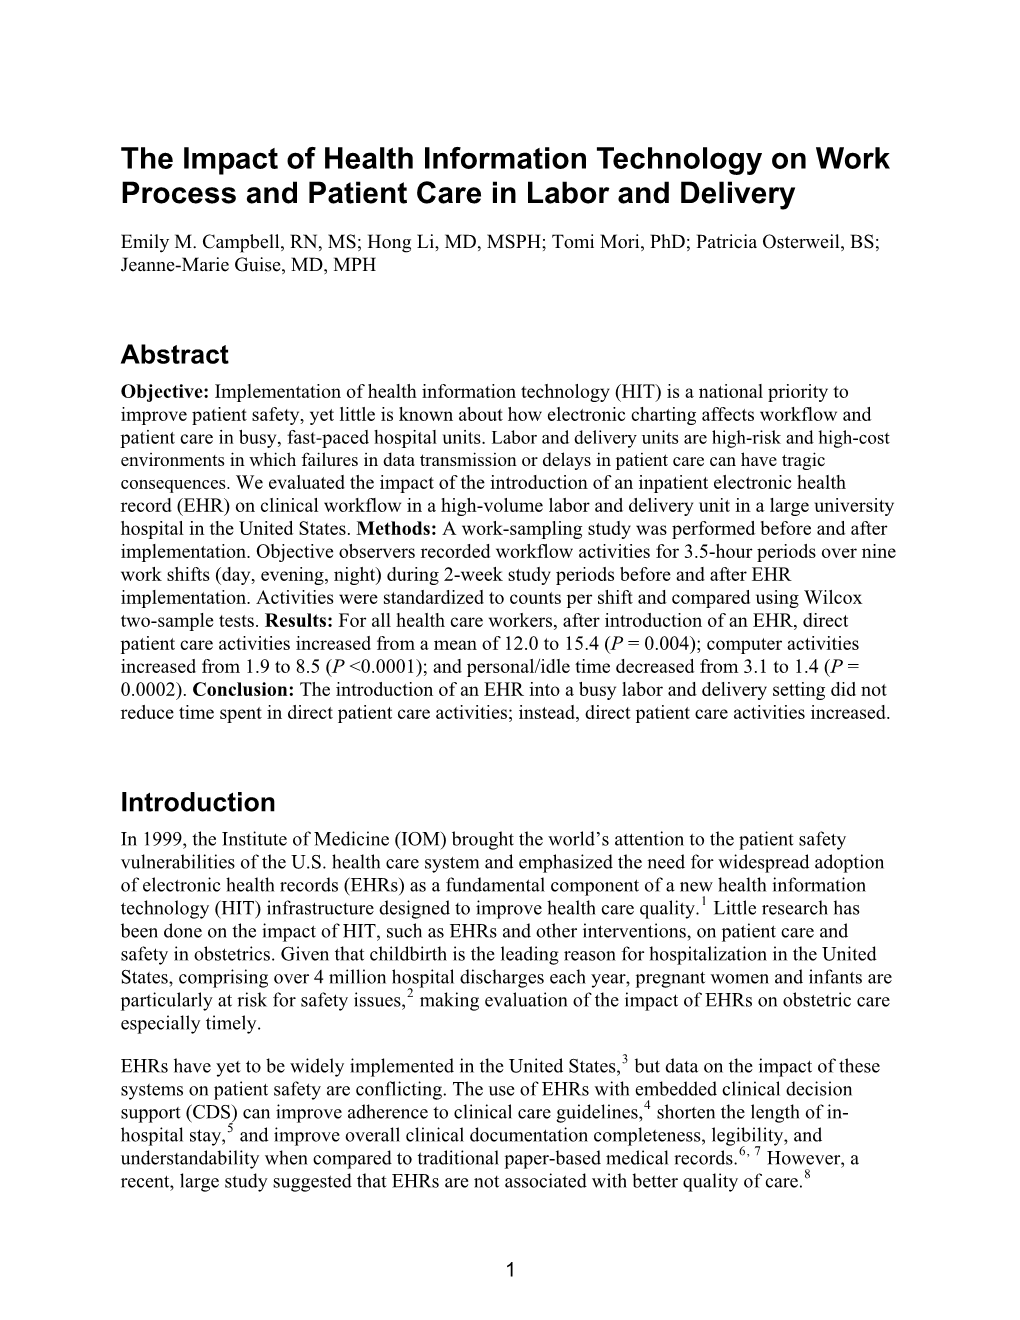 The Impact of Health Information Technology on Work Process and Patient Care in Labor and Delivery